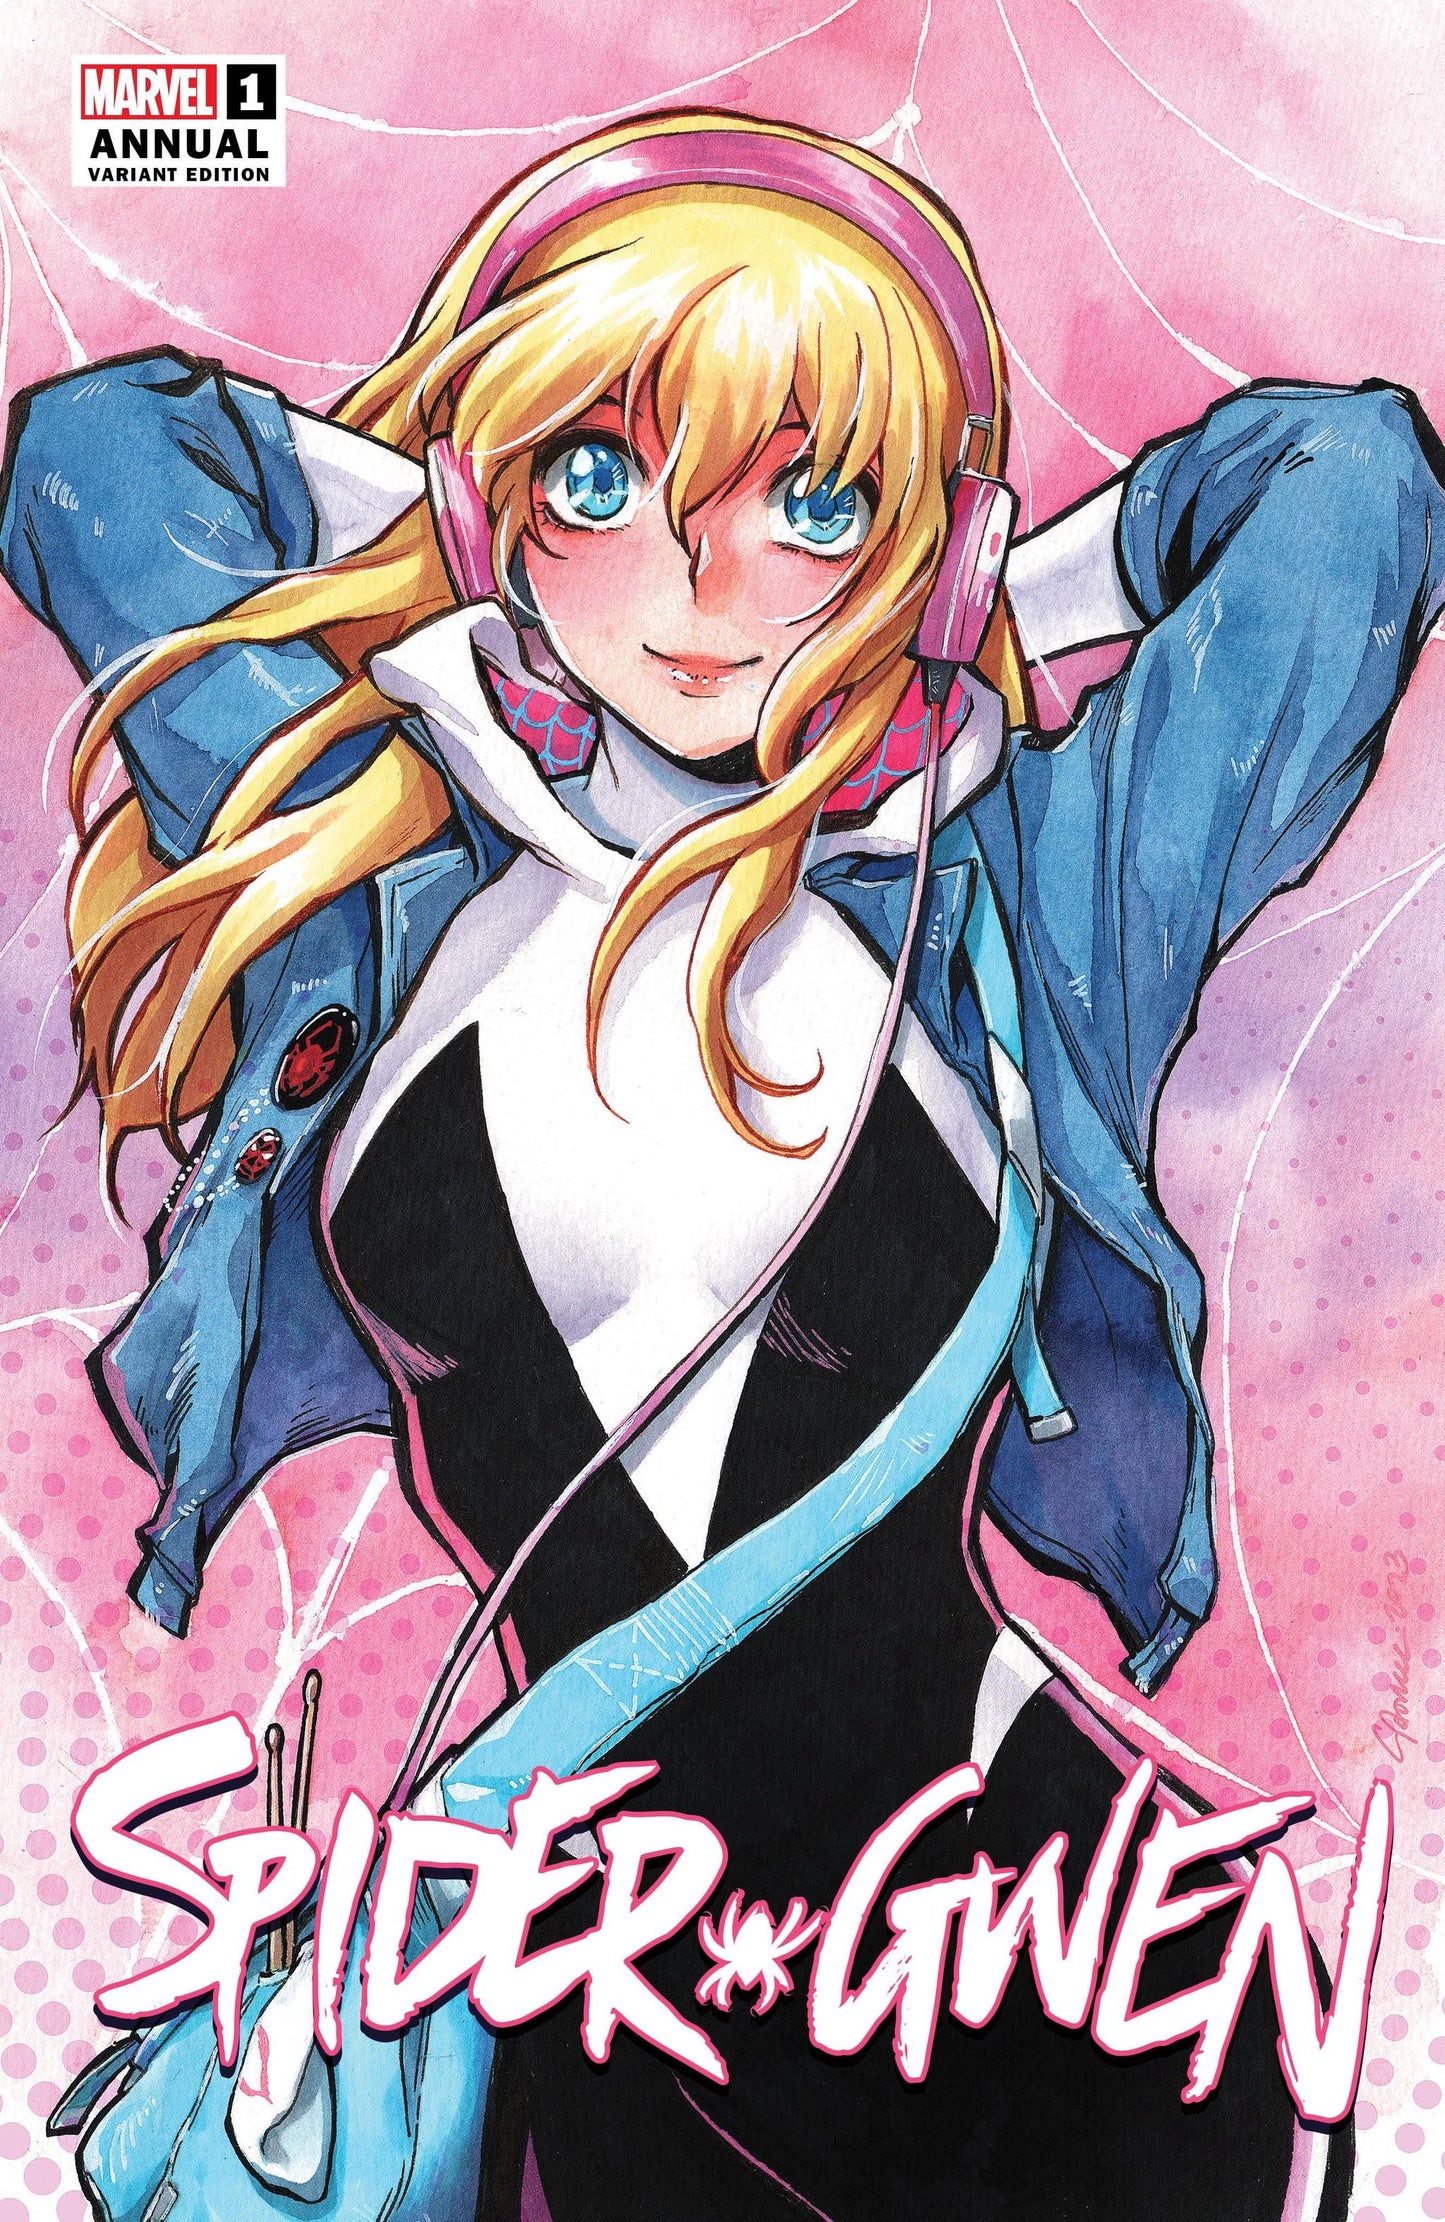 SPIDER-GWEN ANNUAL #1 SAOWEE  VARIANT LIMITED TO 800 COPIES